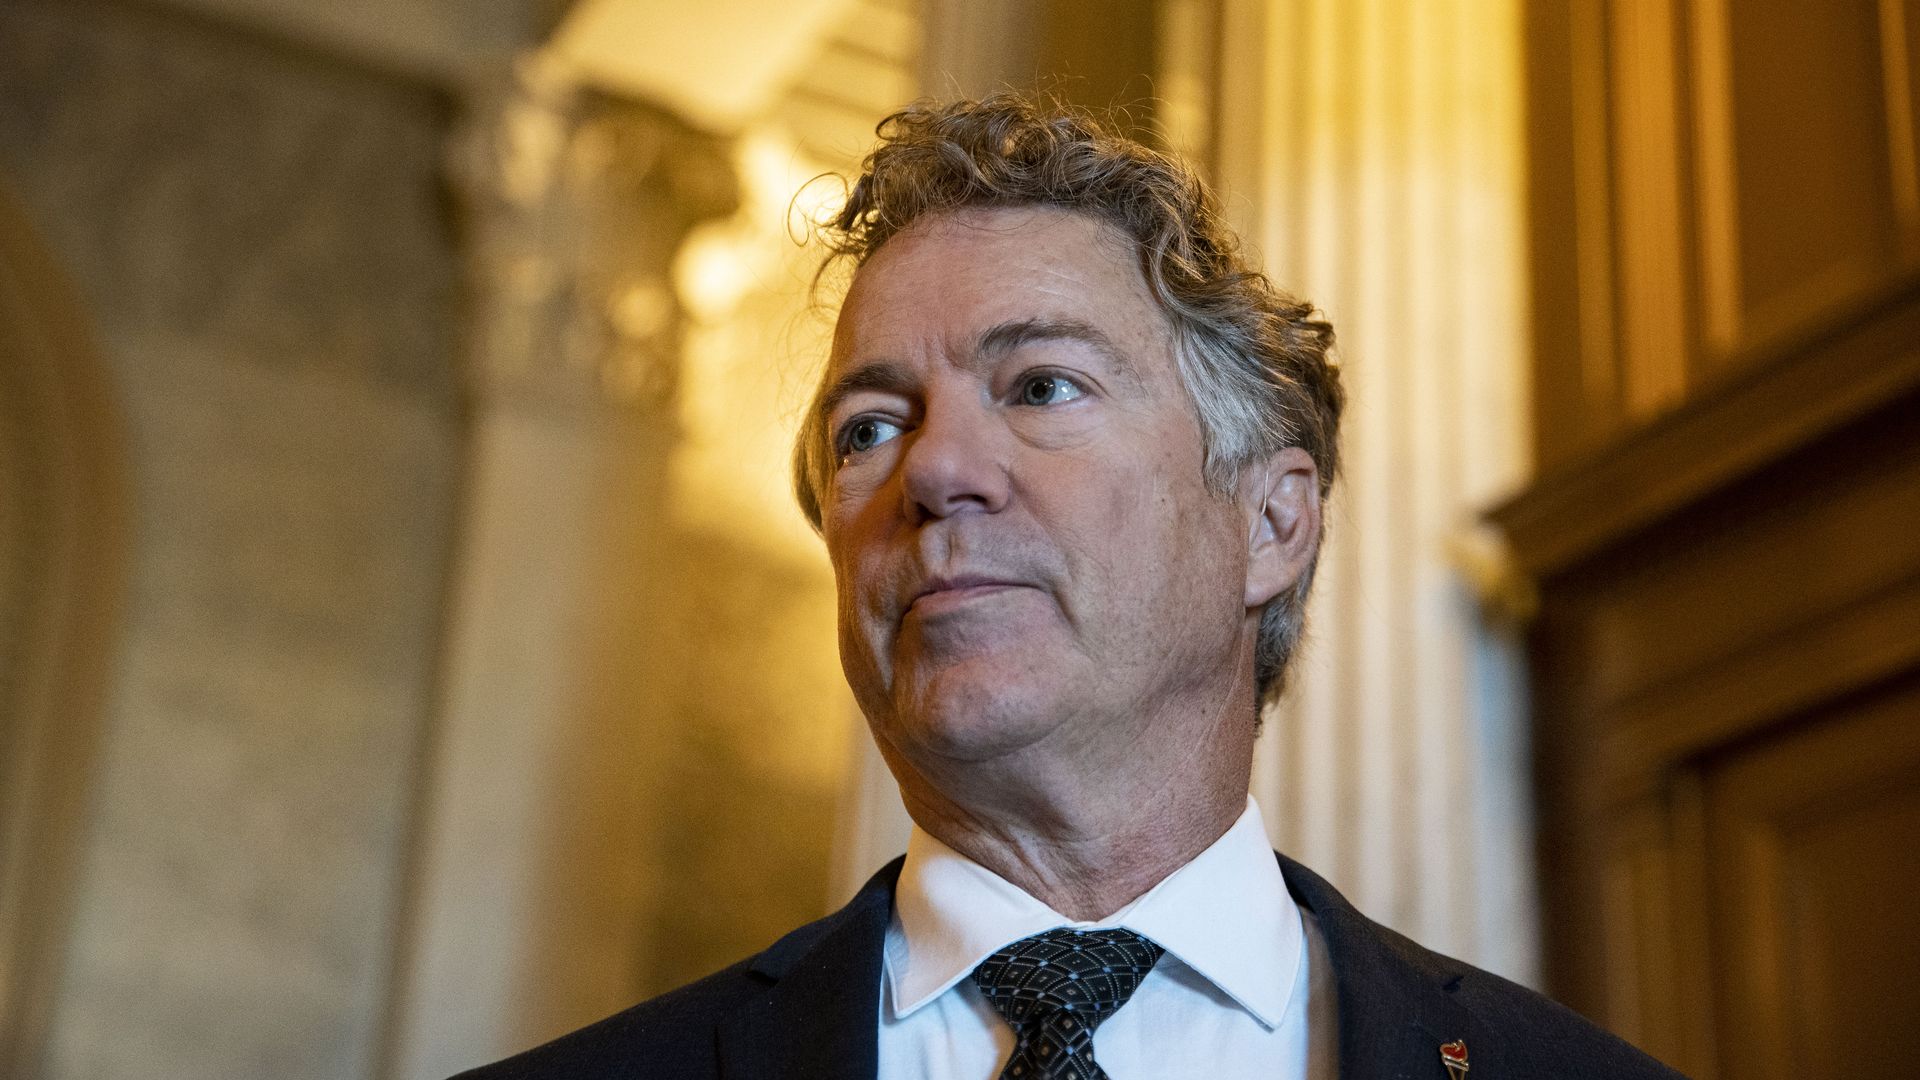 Senator Rand Paul, a Republican from Kentucky, speaks with members of the media following a vote in the U.S. Capitol in Washington, D.C., U.S., on Tuesday, Jan. 11, 2022. 